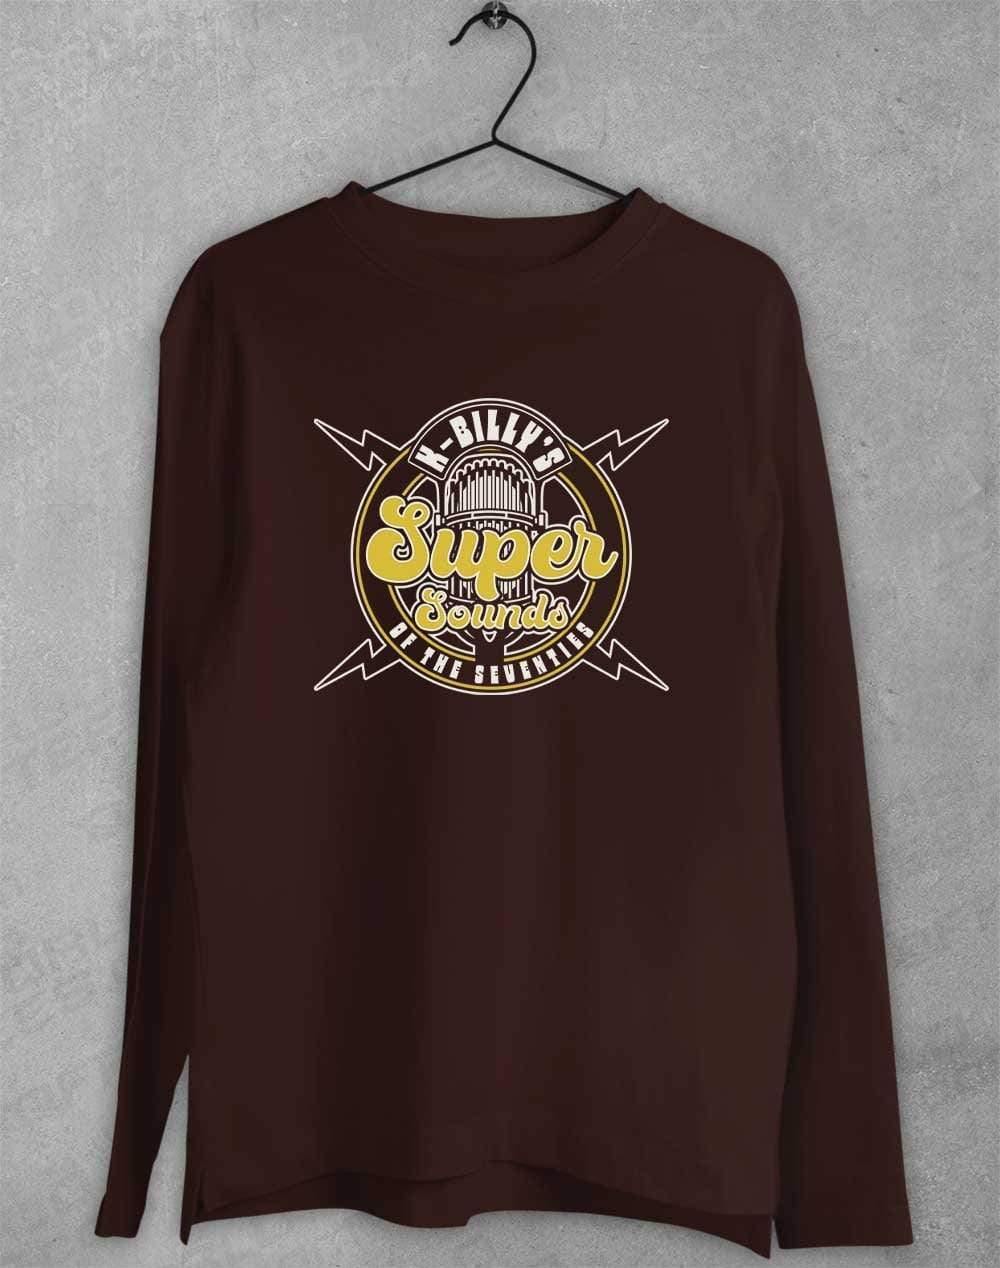 K-Billy's Super Sounds of the 70's Long Sleeve T-Shirt S / Dark Chocolate  - Off World Tees